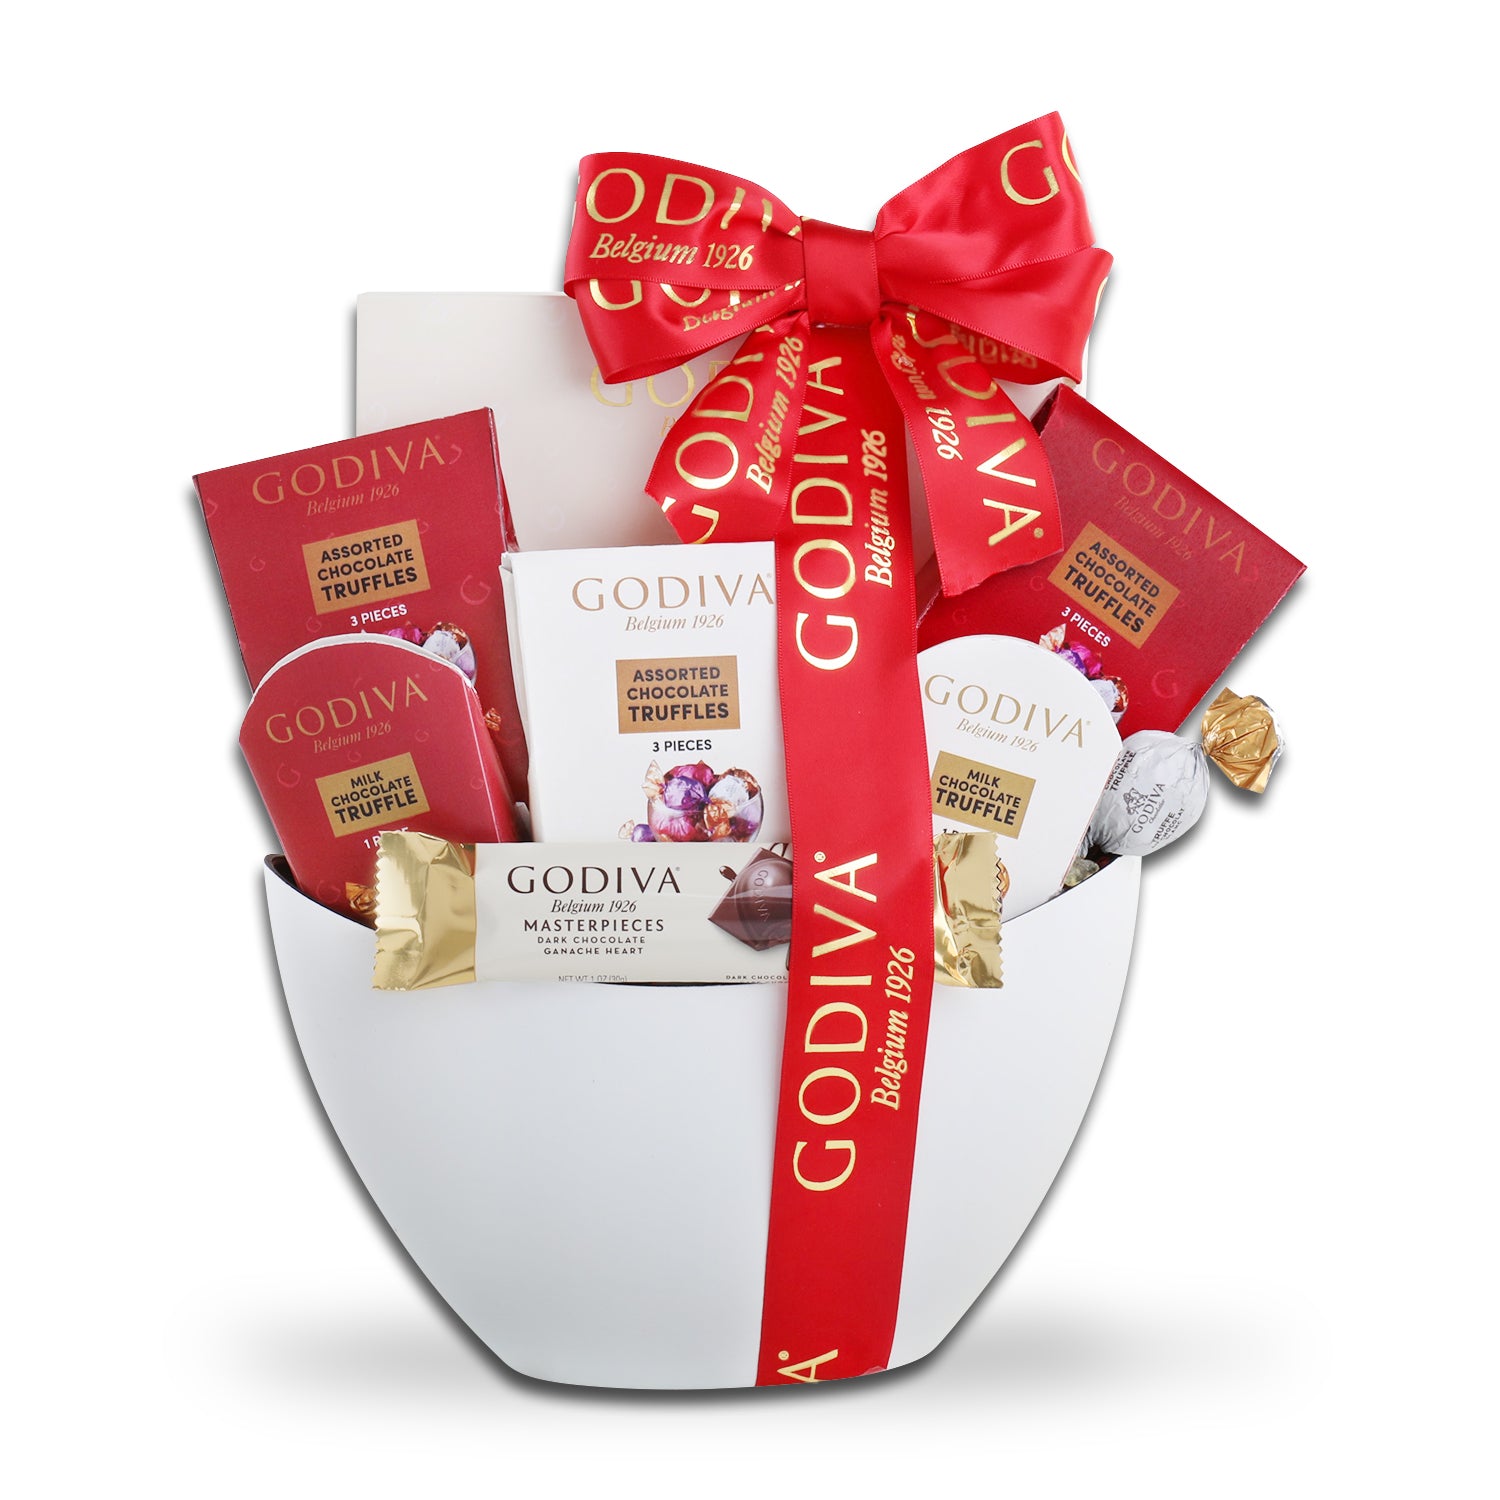 Image of gift basket with contents displayed in white container with red bow